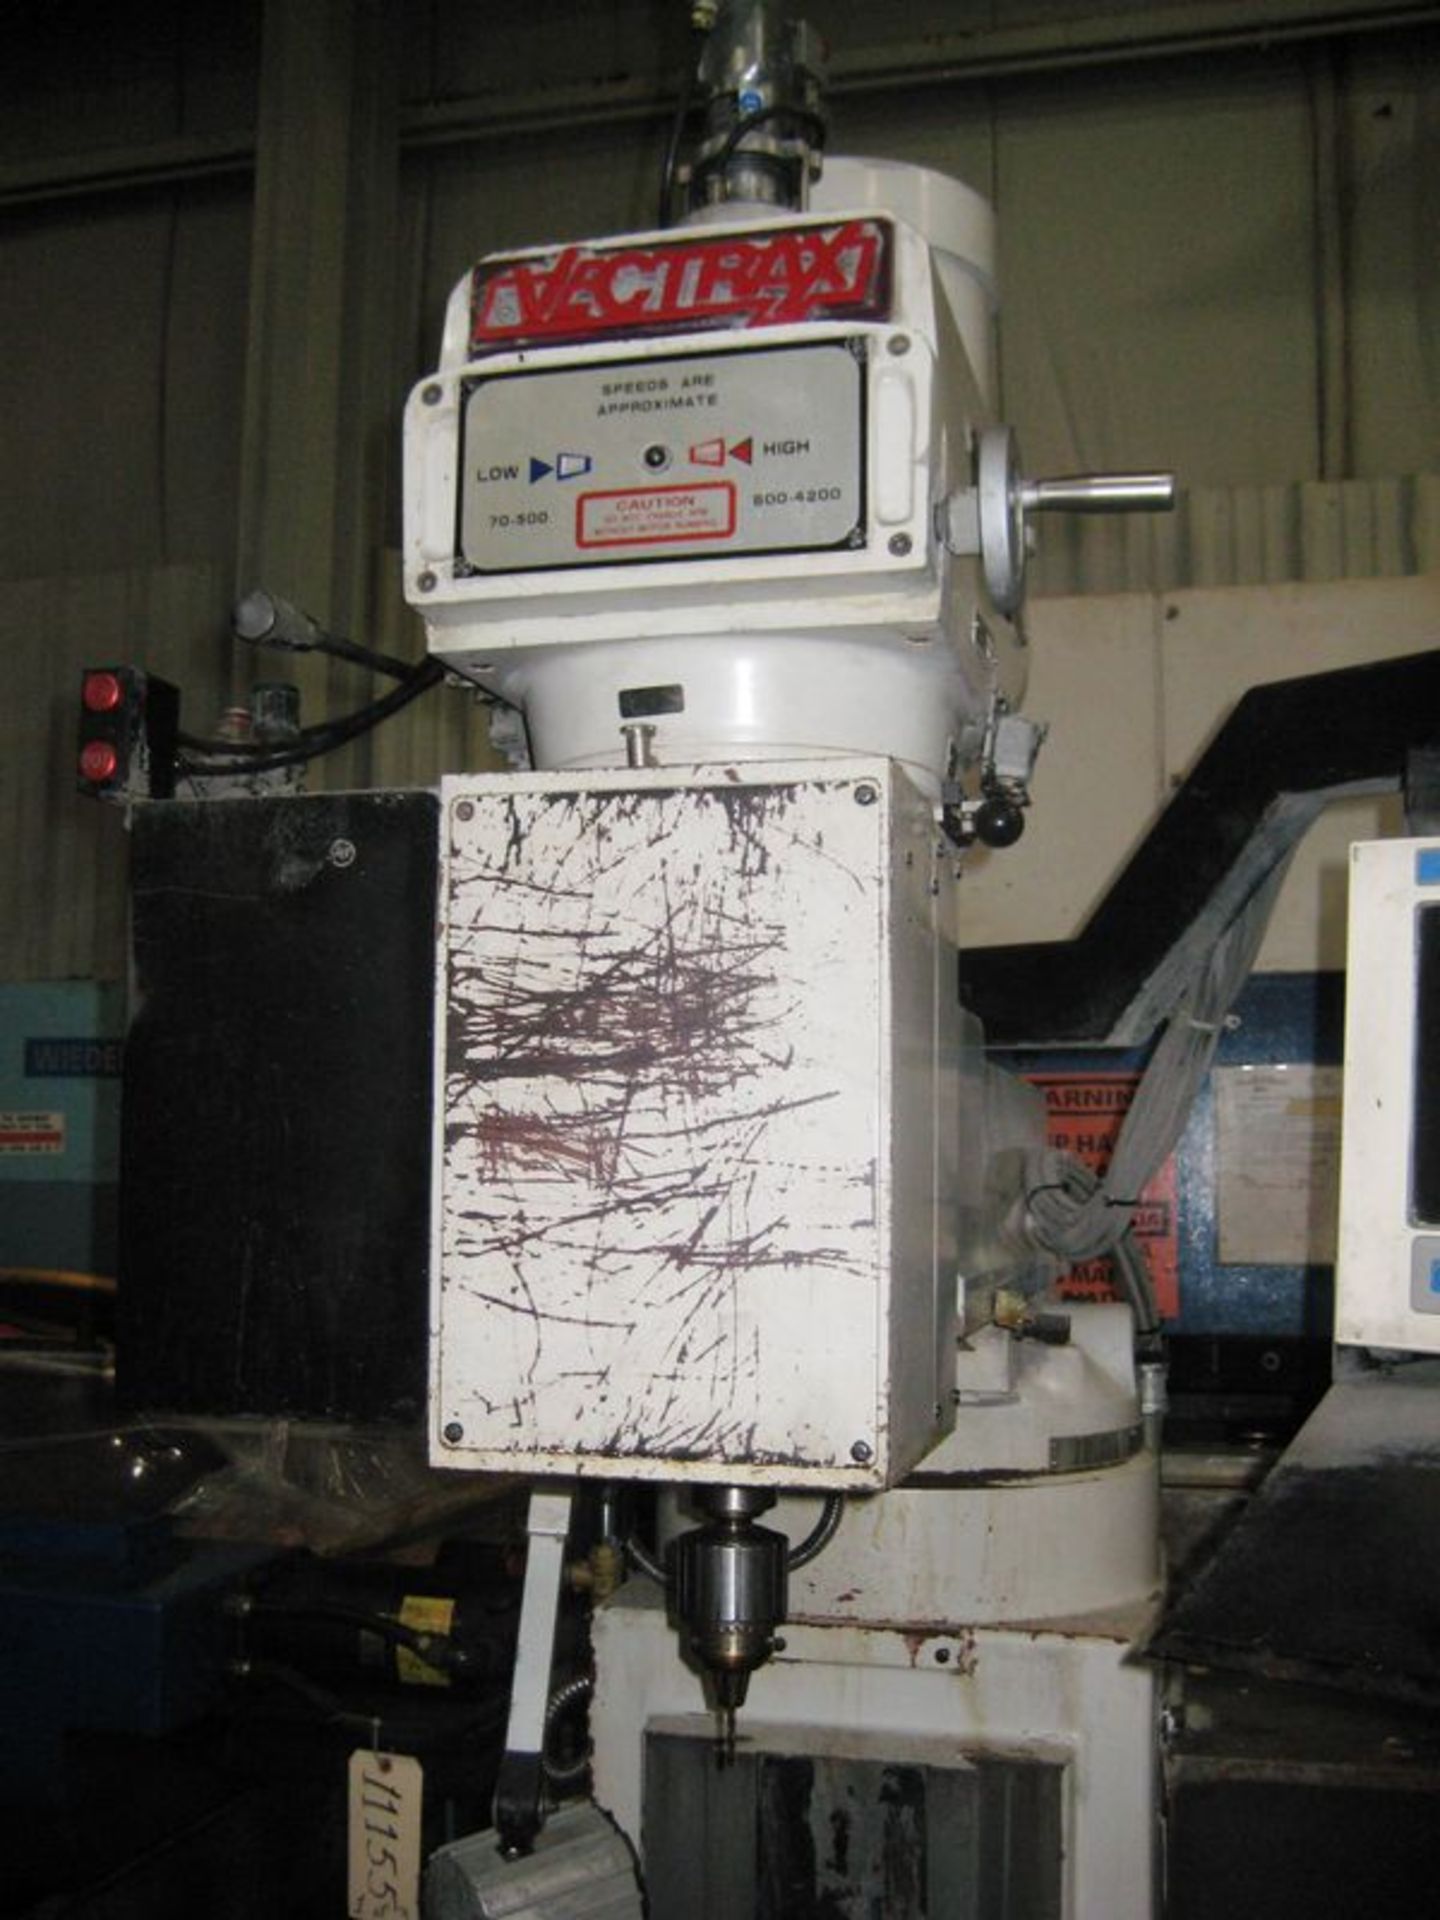 Vectrax GS-N16V 3-Axis CNC Knee Type Milling Machine, S/N 9030192NV, New 2001 General - Image 5 of 5